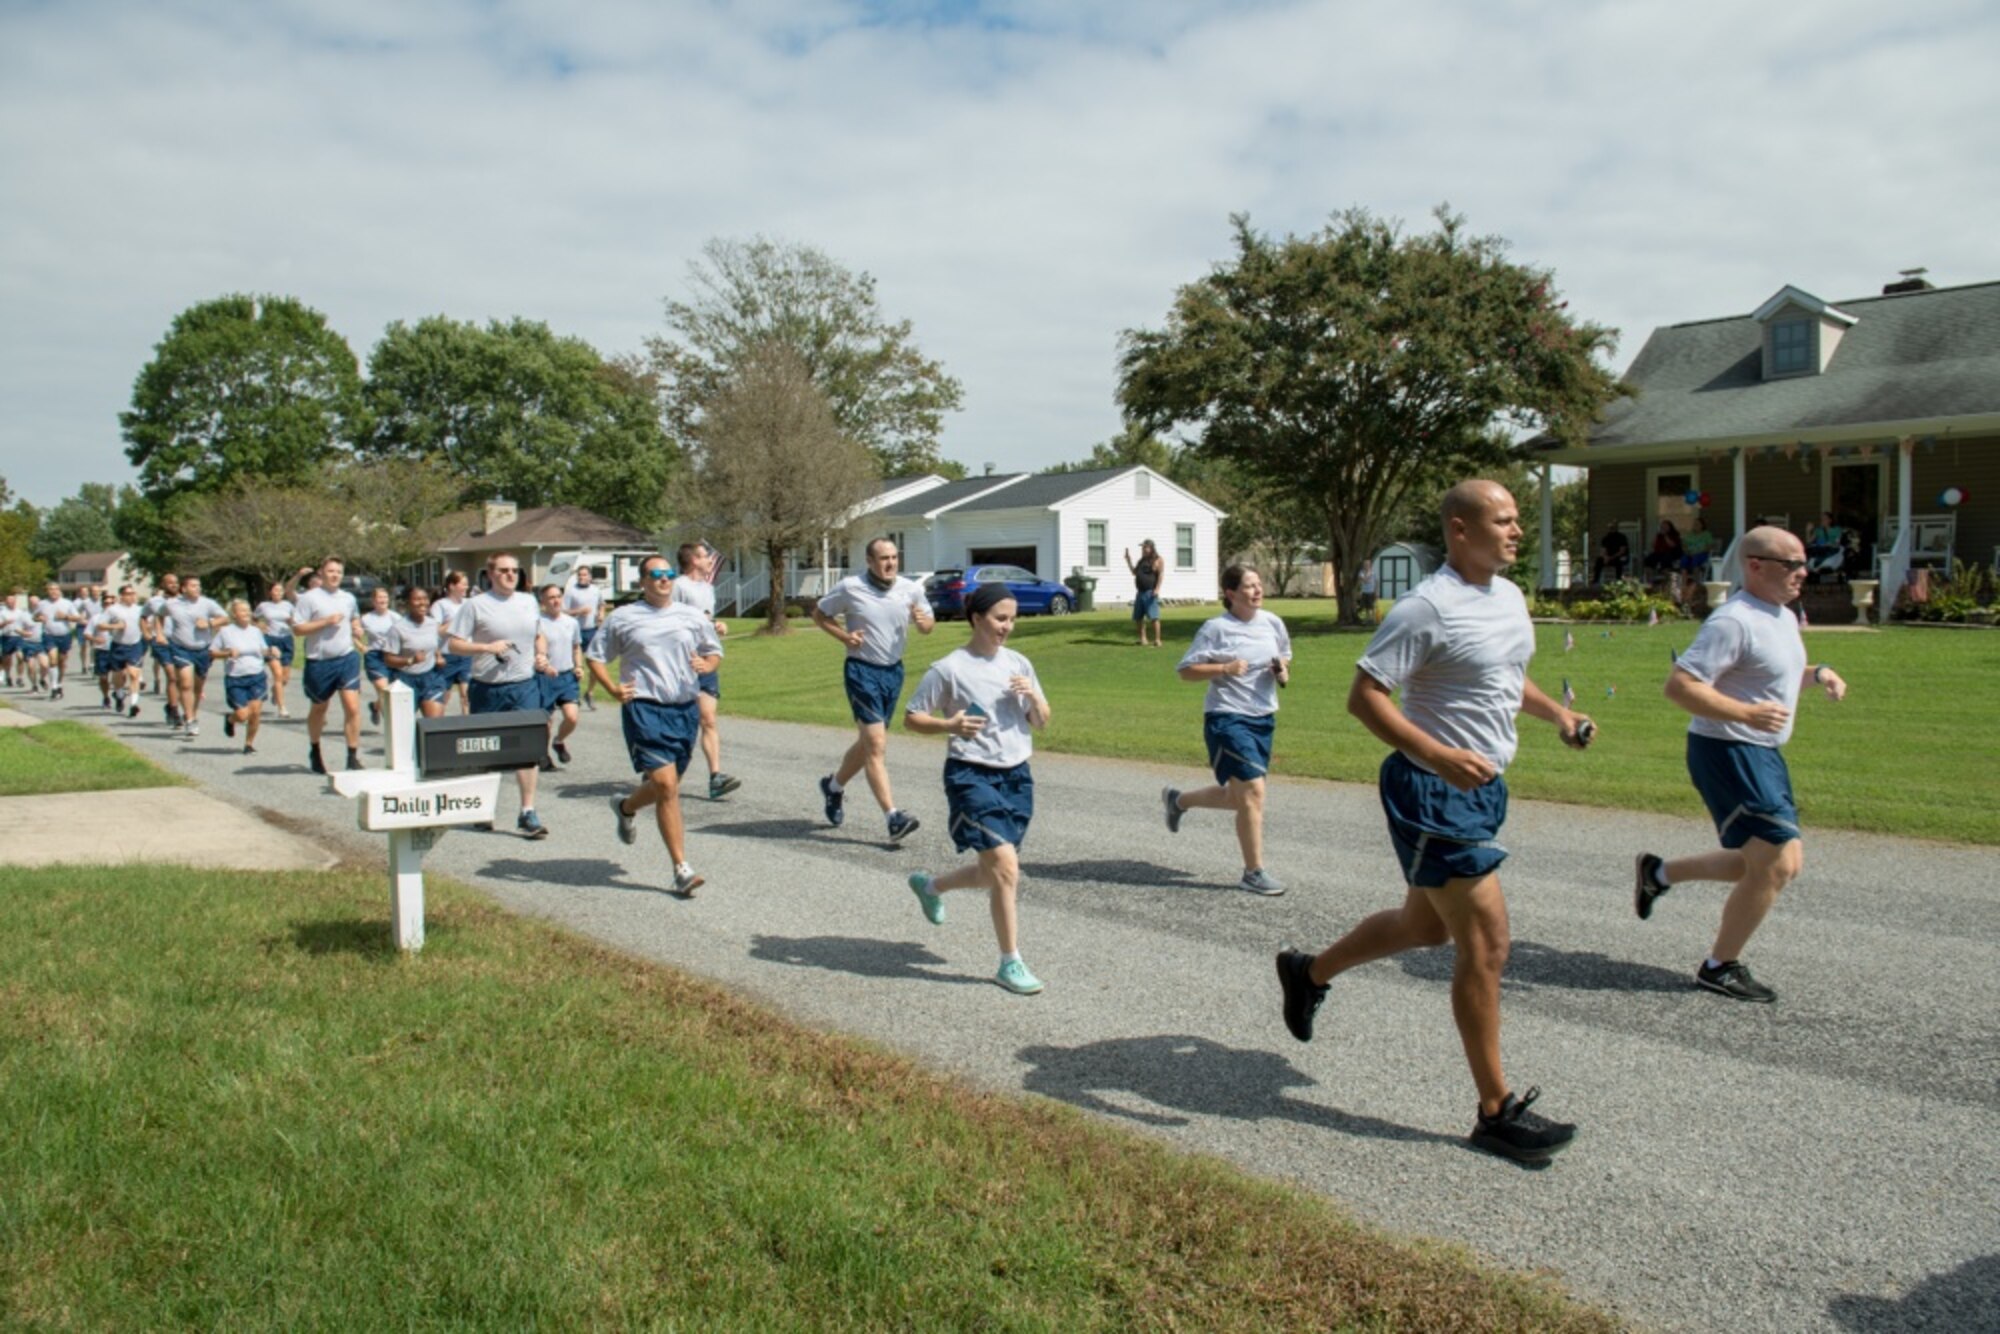 Airmen run in formation past homes in a neighborhood